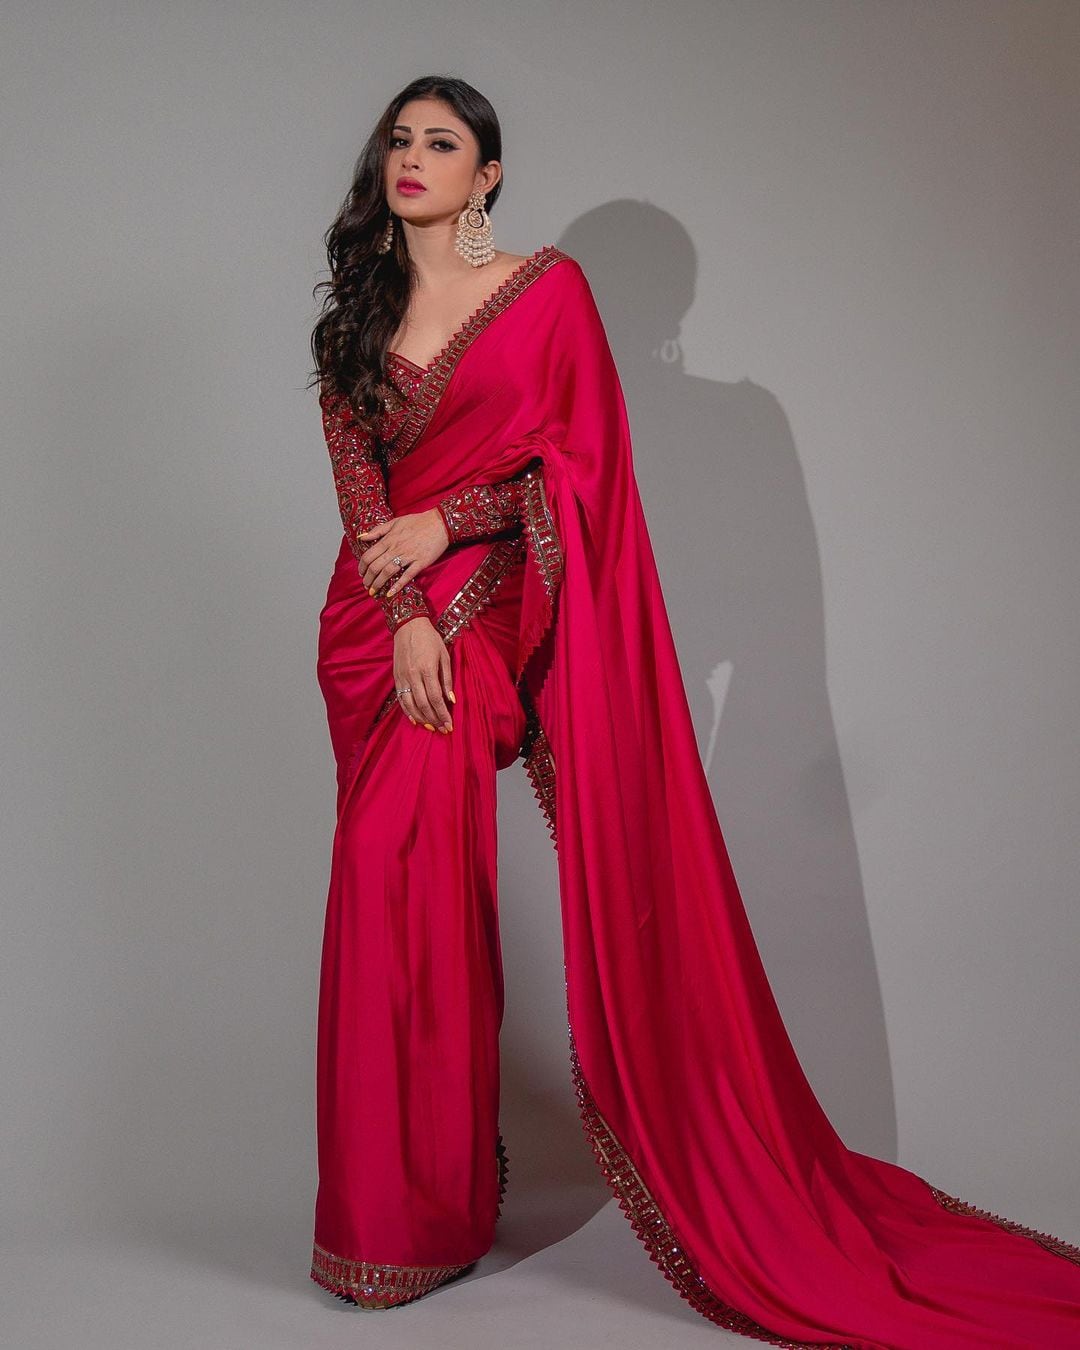 Oodni The Boutique - A deep red saree in wrinkle fabric teamed with  multicolored blouse ✨ | Facebook